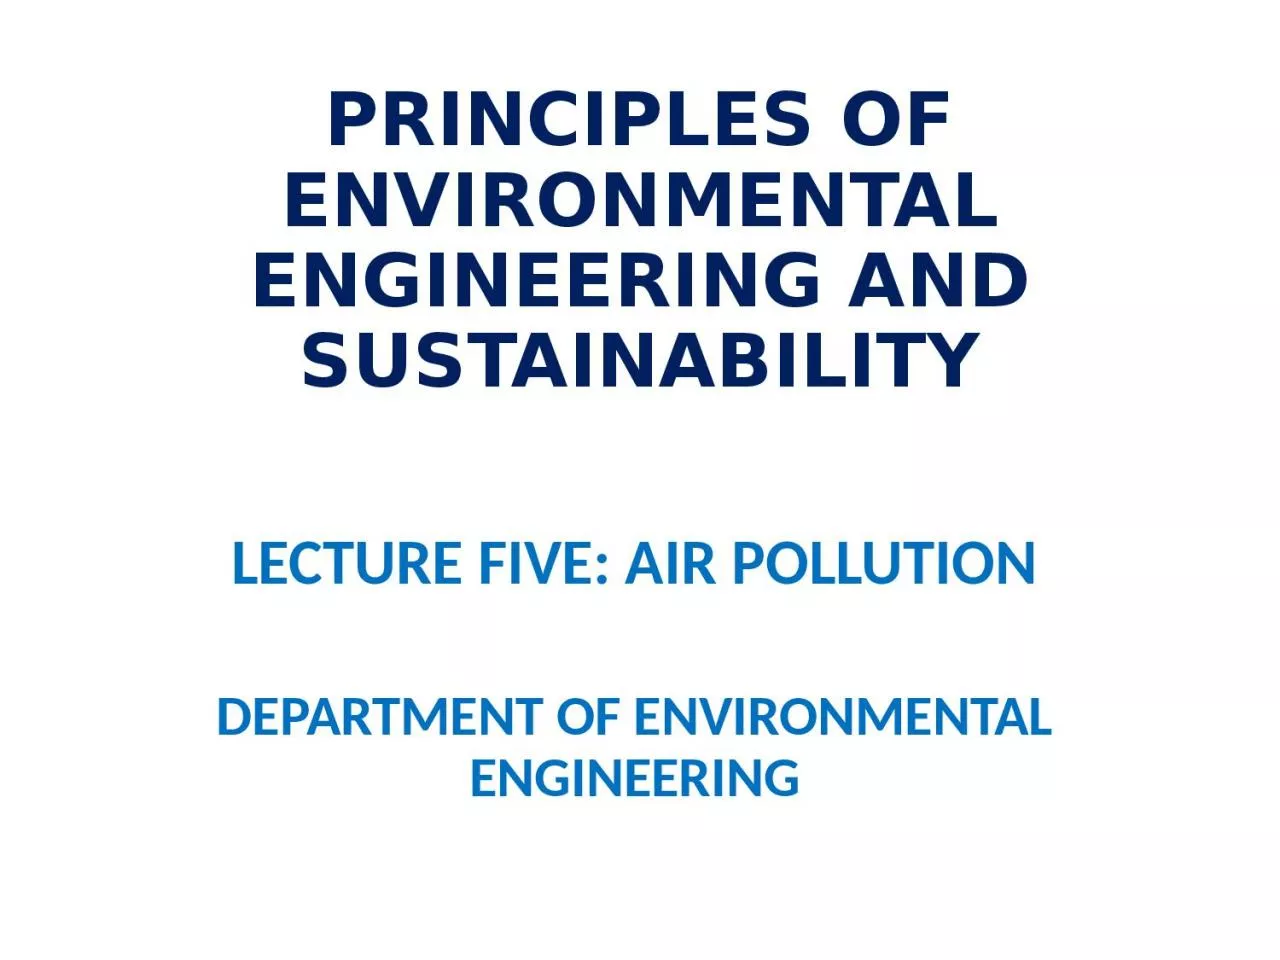 Principles of Environmental Engineering and Sustainability